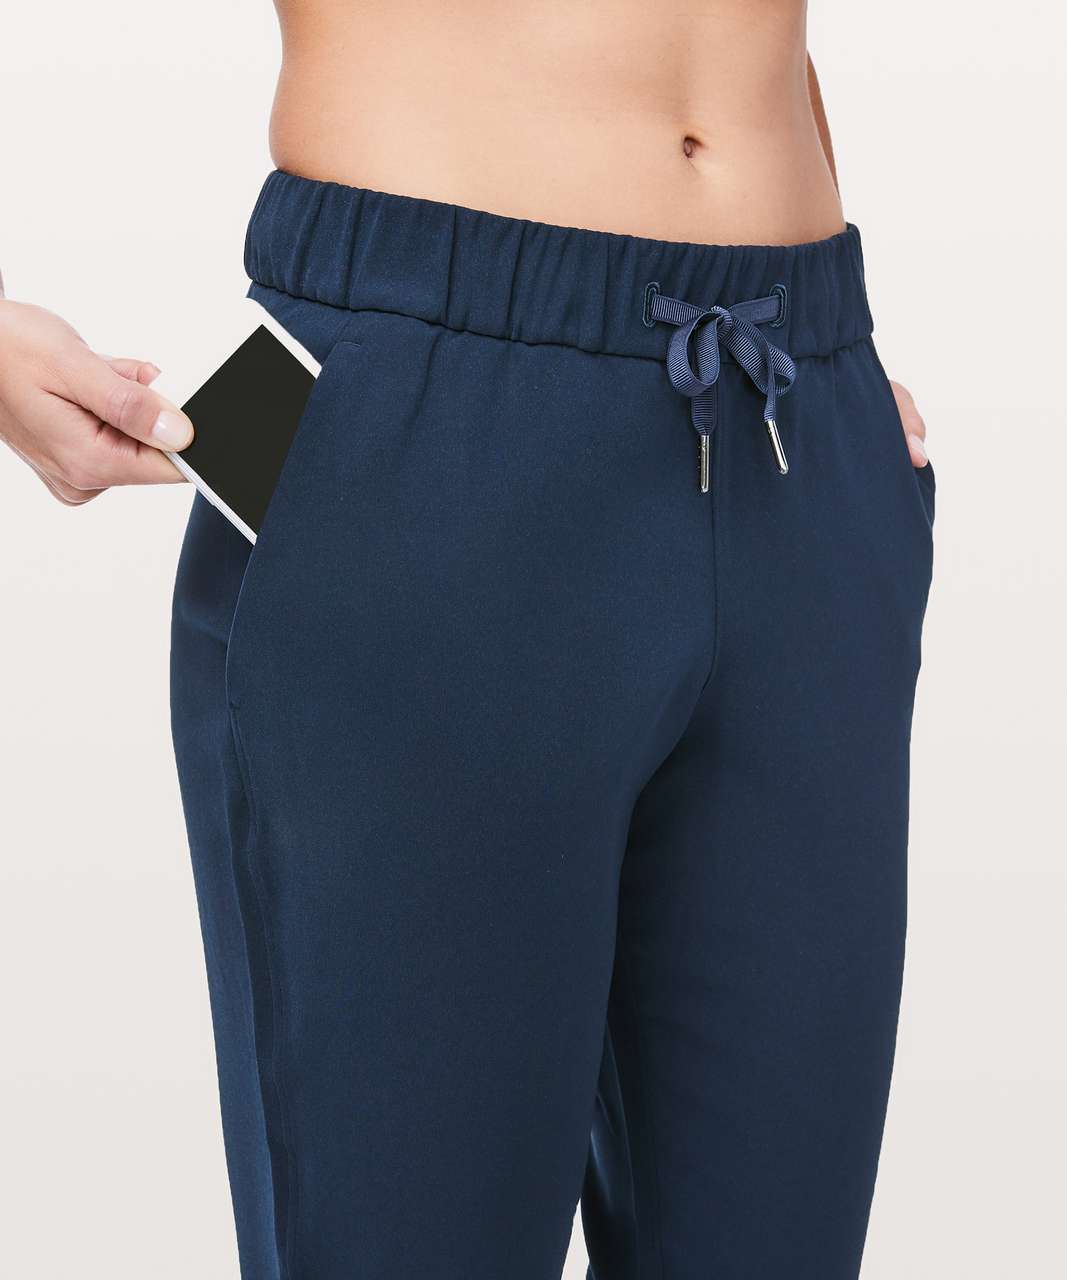 Lululemon On The Fly Pant *Woven 27" - True Navy